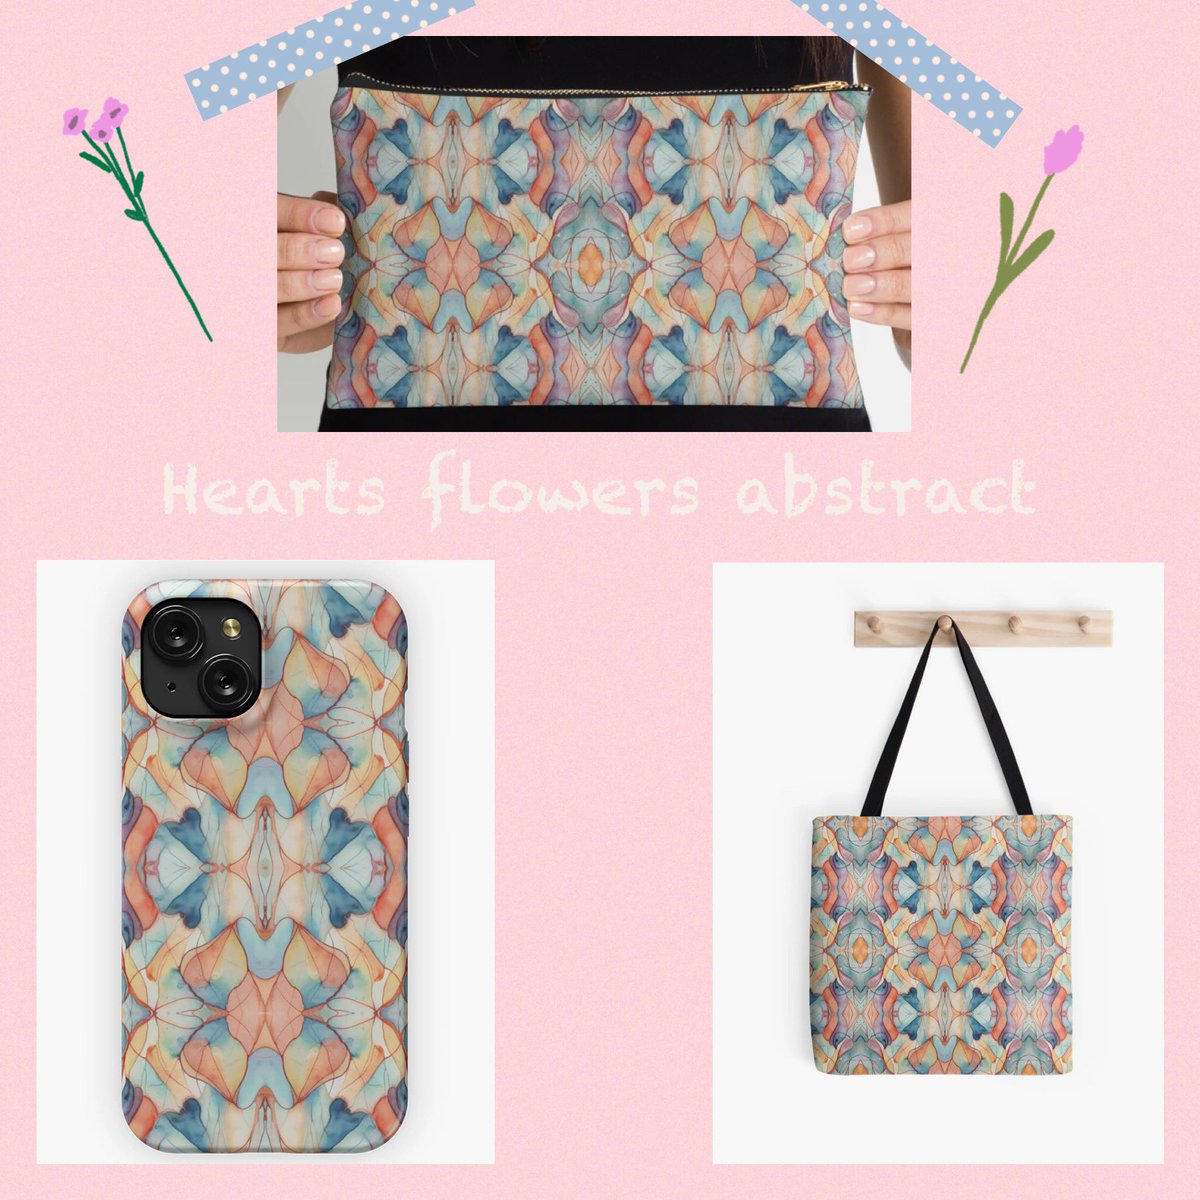 Discover how this design comes to life on various products from bags to phone cases. 🌼🧡

Check it out - redbubble.com/shop/ap/154754…

#IndieArtist #Moxi #RBandME #WatercolorArt #ModernArt #HeartsFlowersAbstract #DesignInspiration #ArtisticExpression #CreativeDecor #RedbubbleArtist